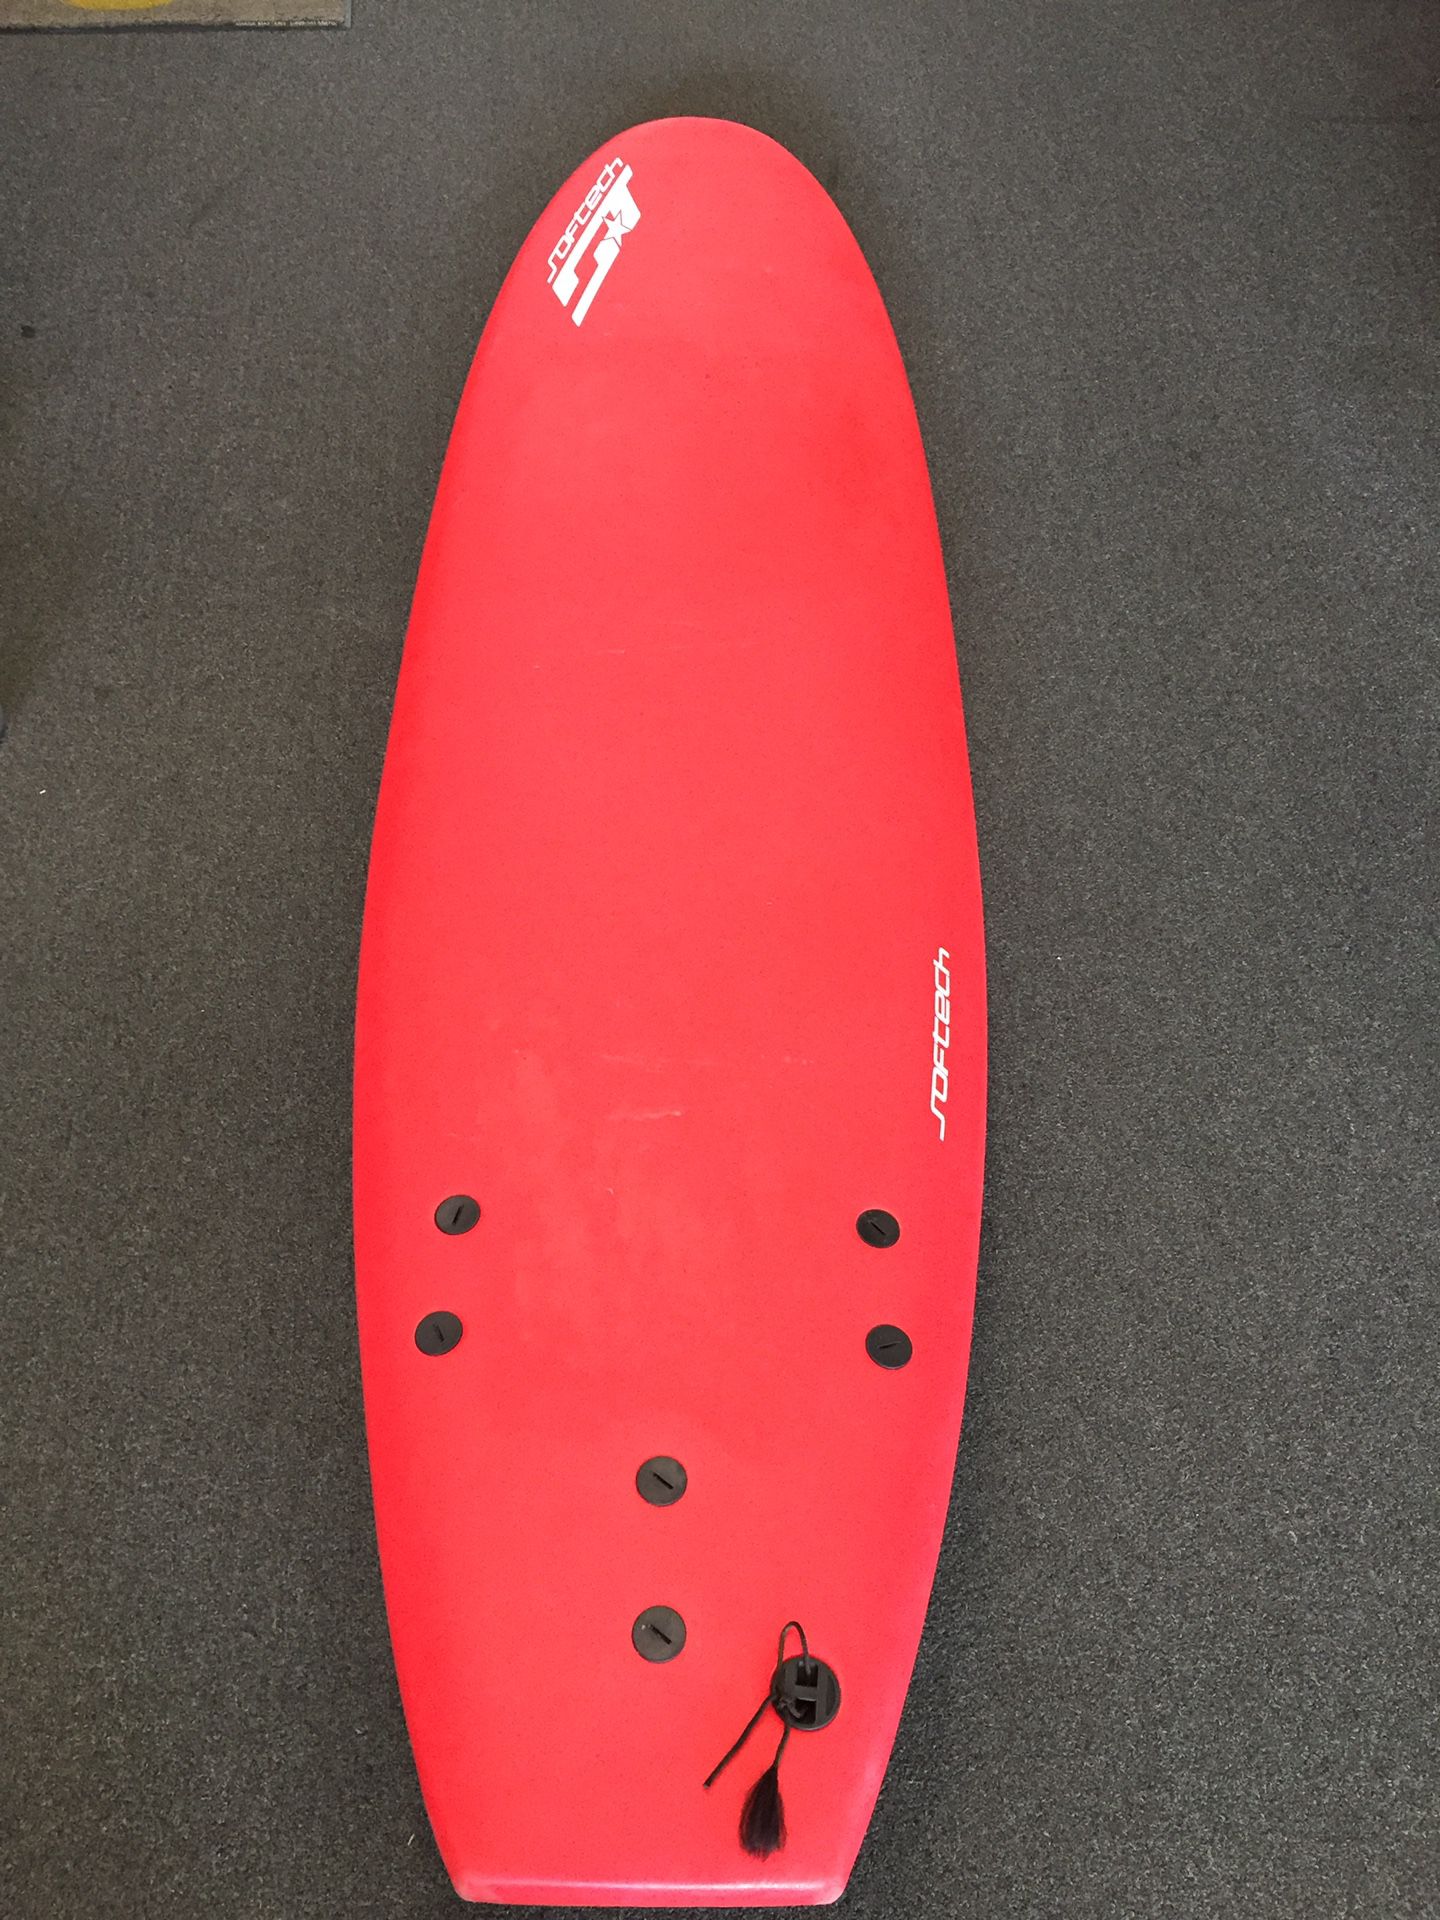 7’ softech beginners surfboard surfing something special